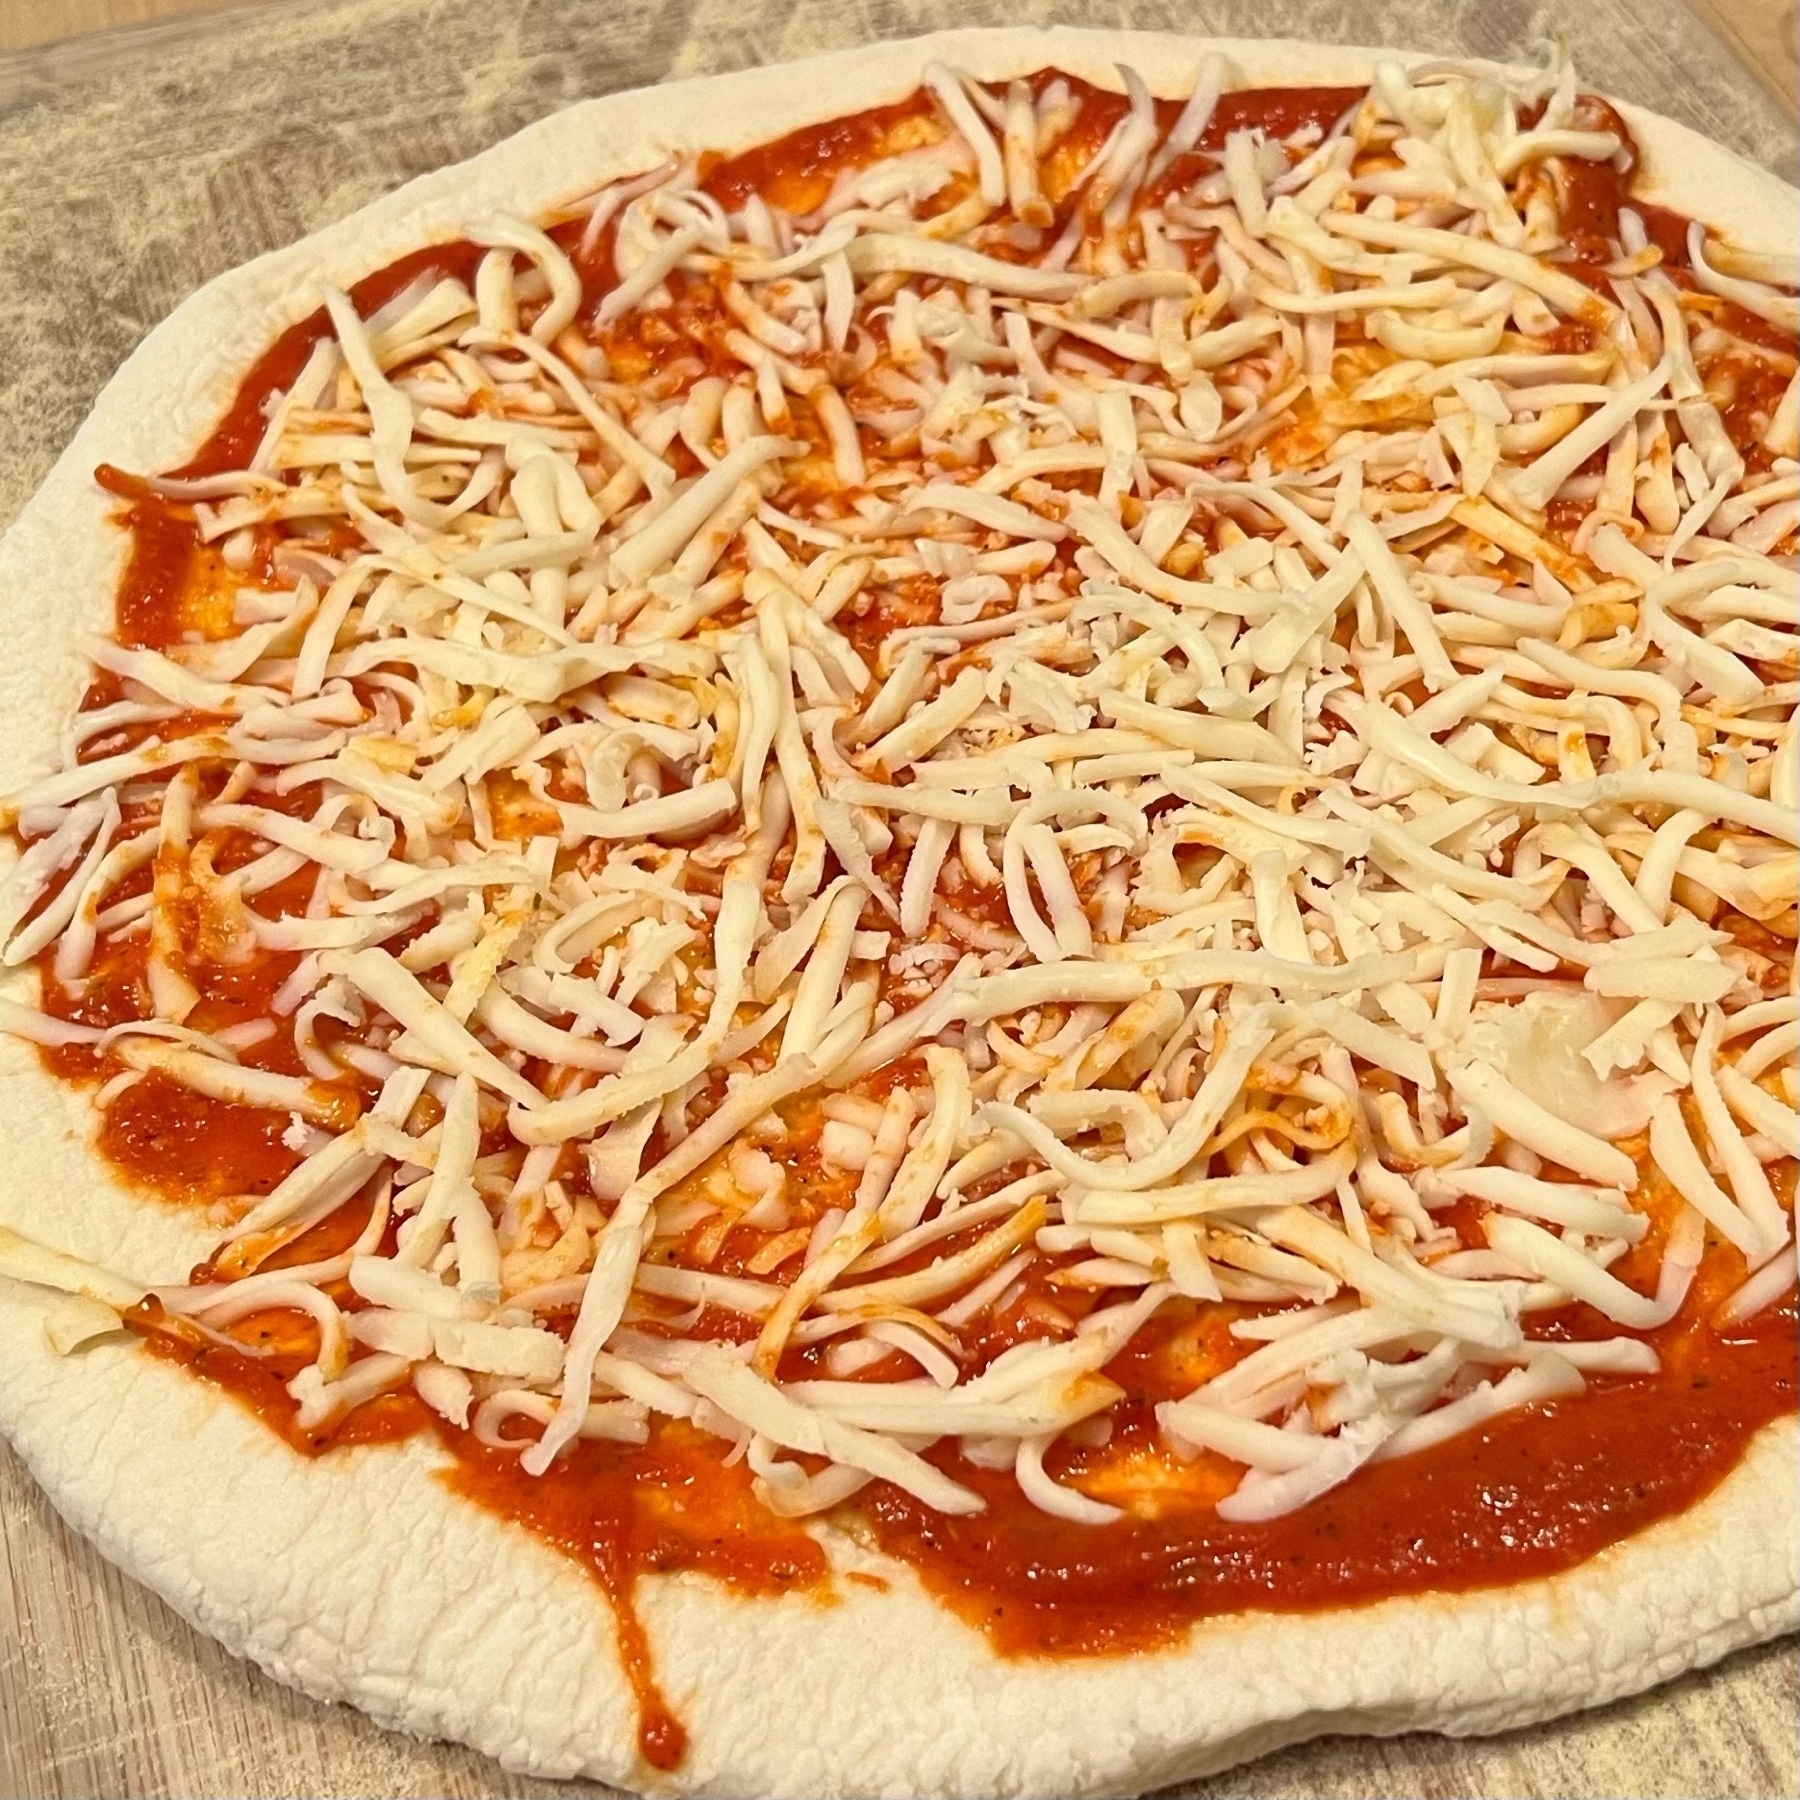 uncooked pizza with cheese